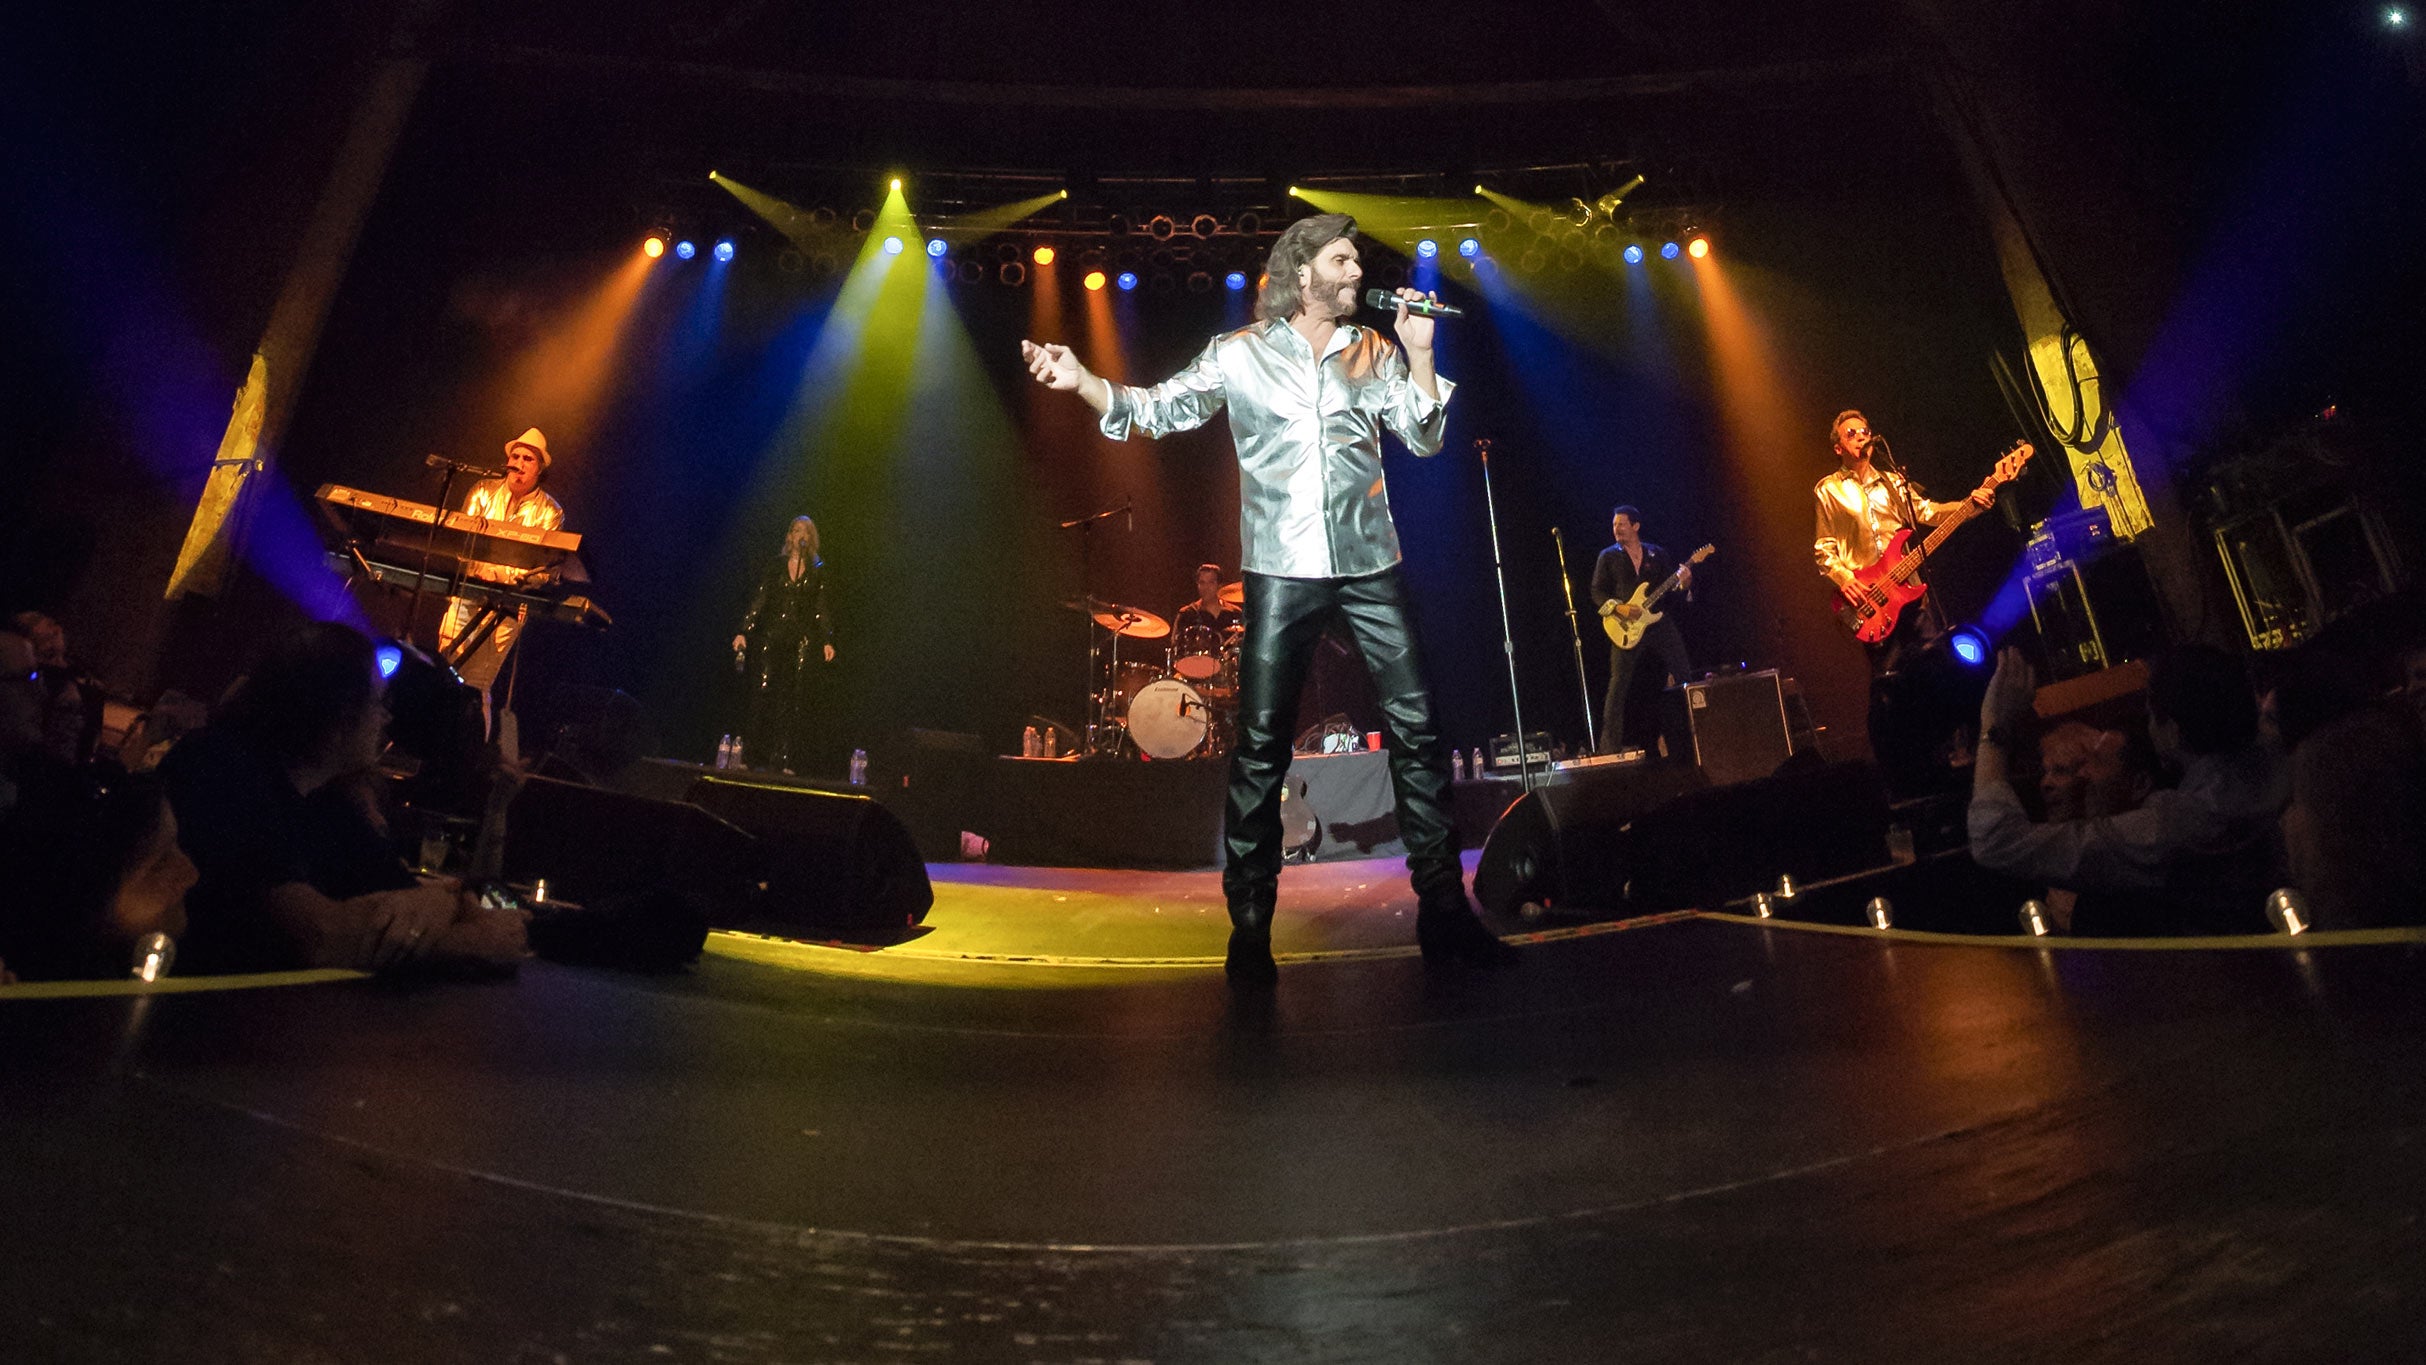 The New York Bee Gees at Mayo Performing Arts Center